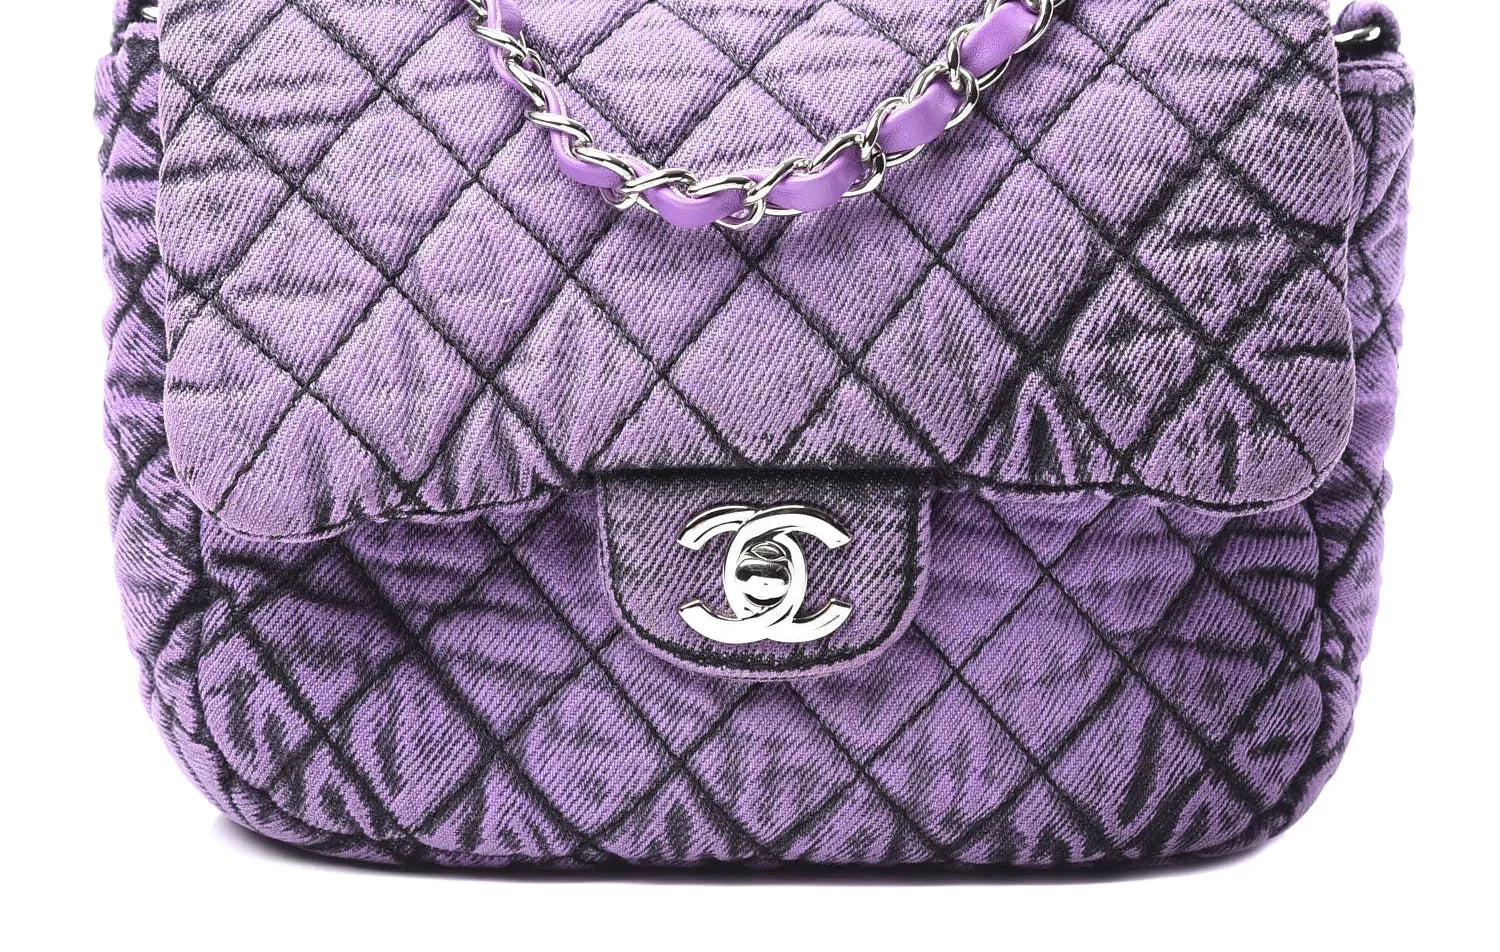 CHANEL Vintage Box Quilted Fold Down Envelope Clutch Bag - A Retro Tale